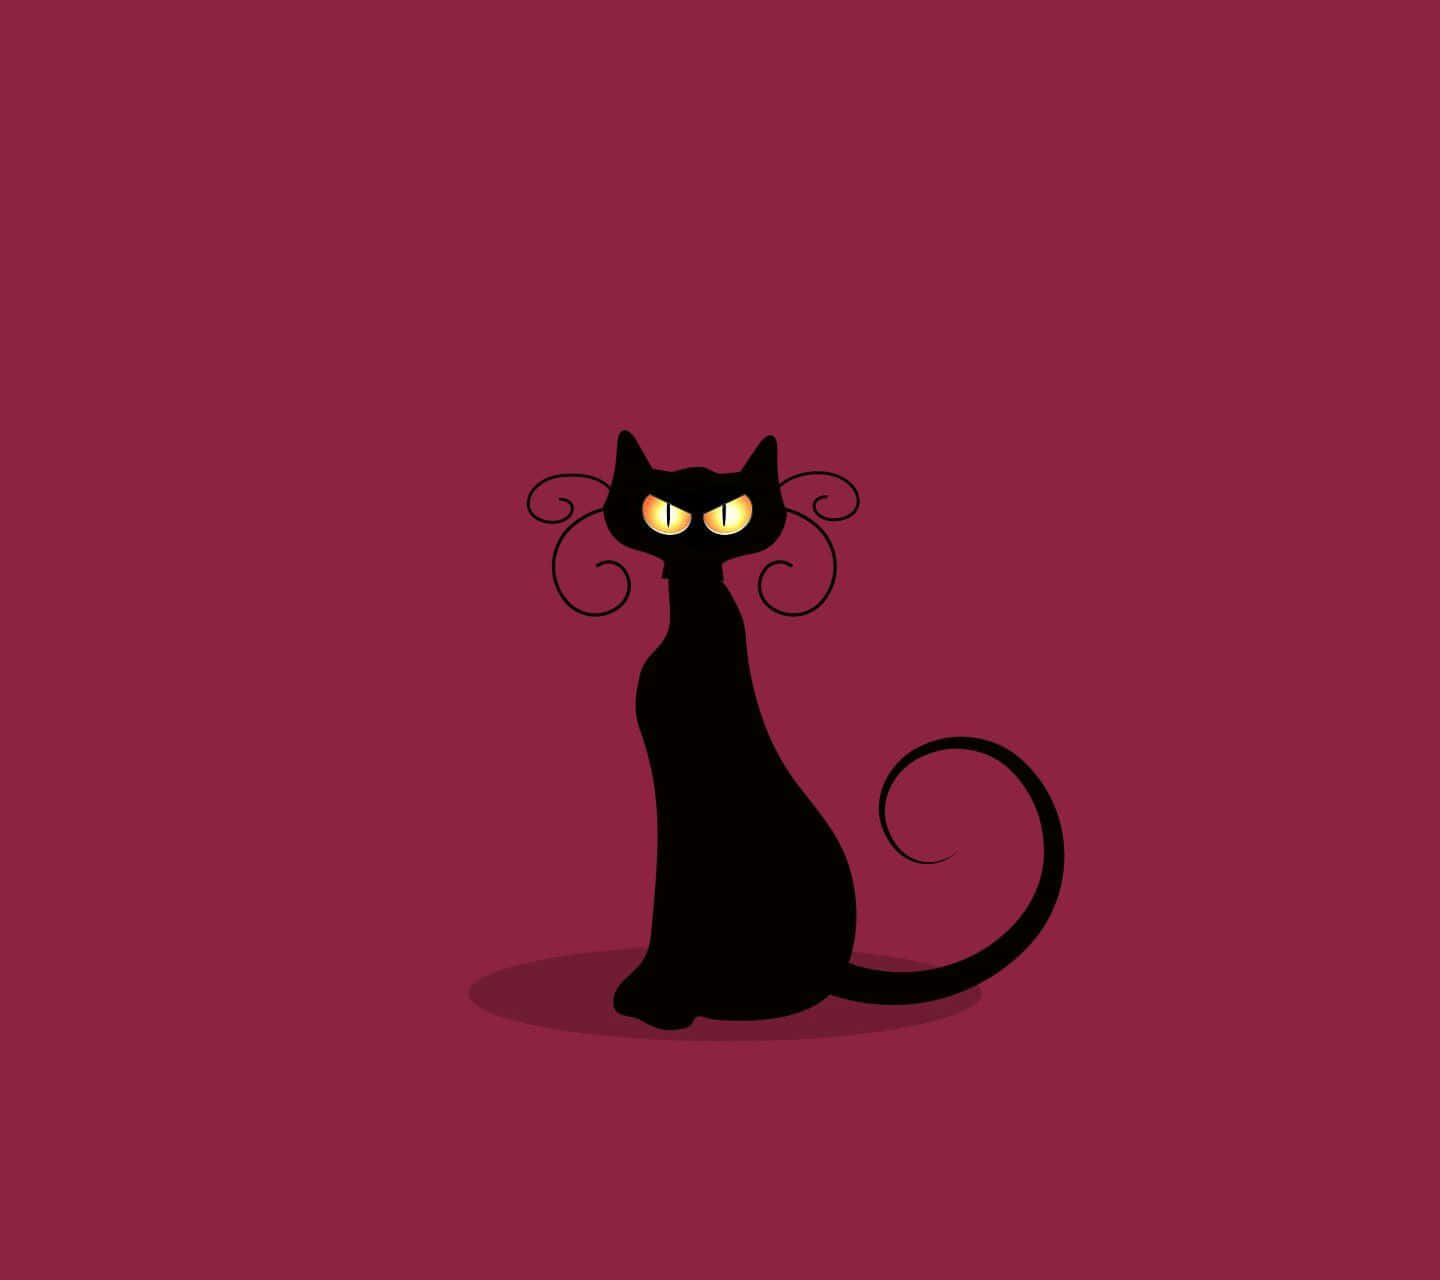 A Black Cat With Yellow Eyes On A Maroon Background